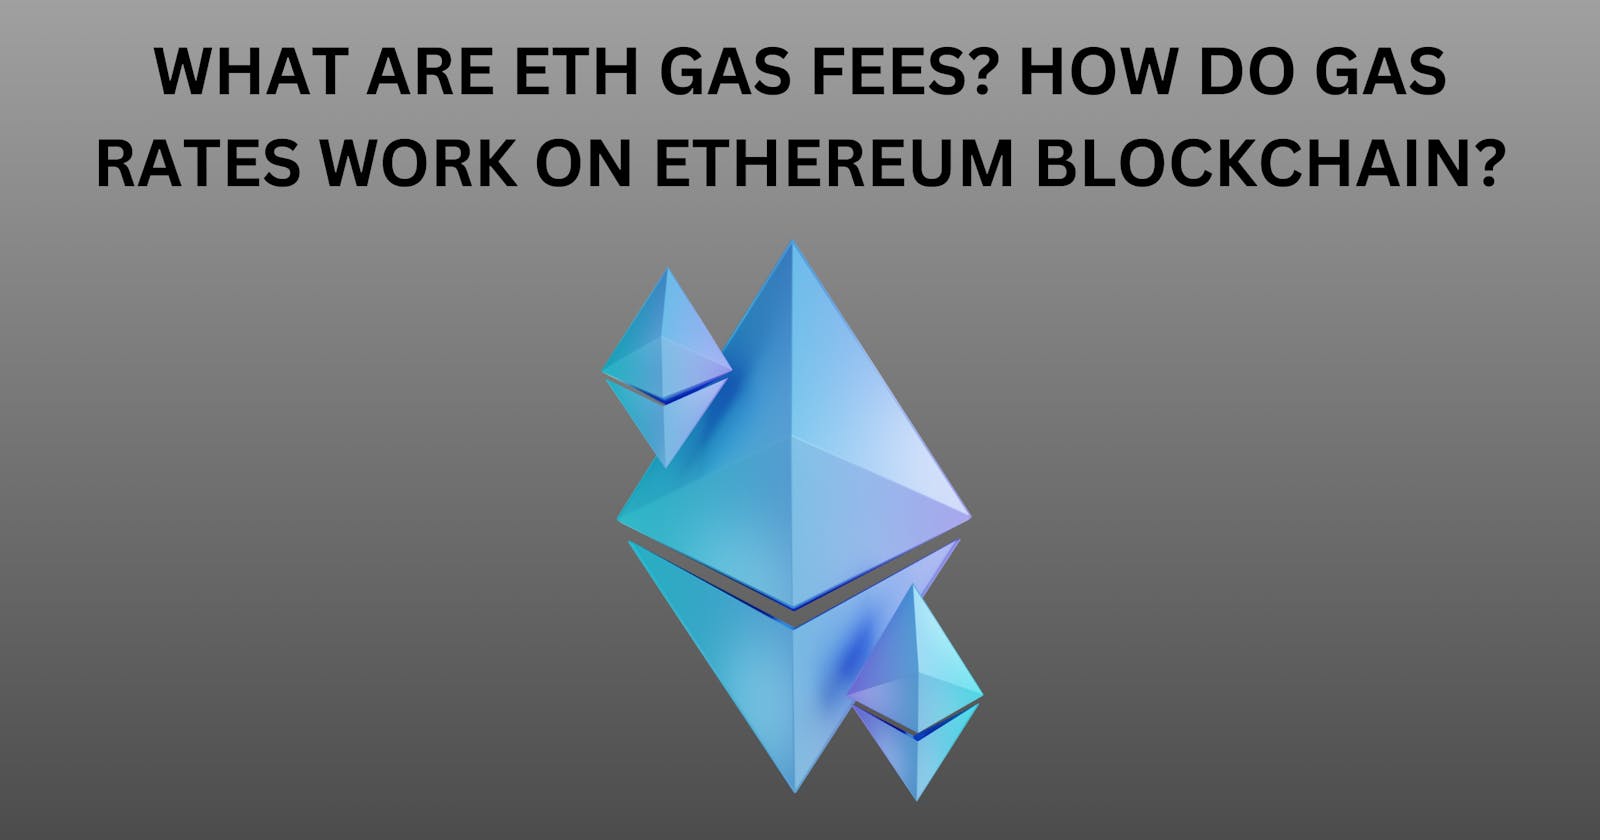 What Are Eth Gas Fees? How Do Gas Rates Work On Ethereum Blockchain?